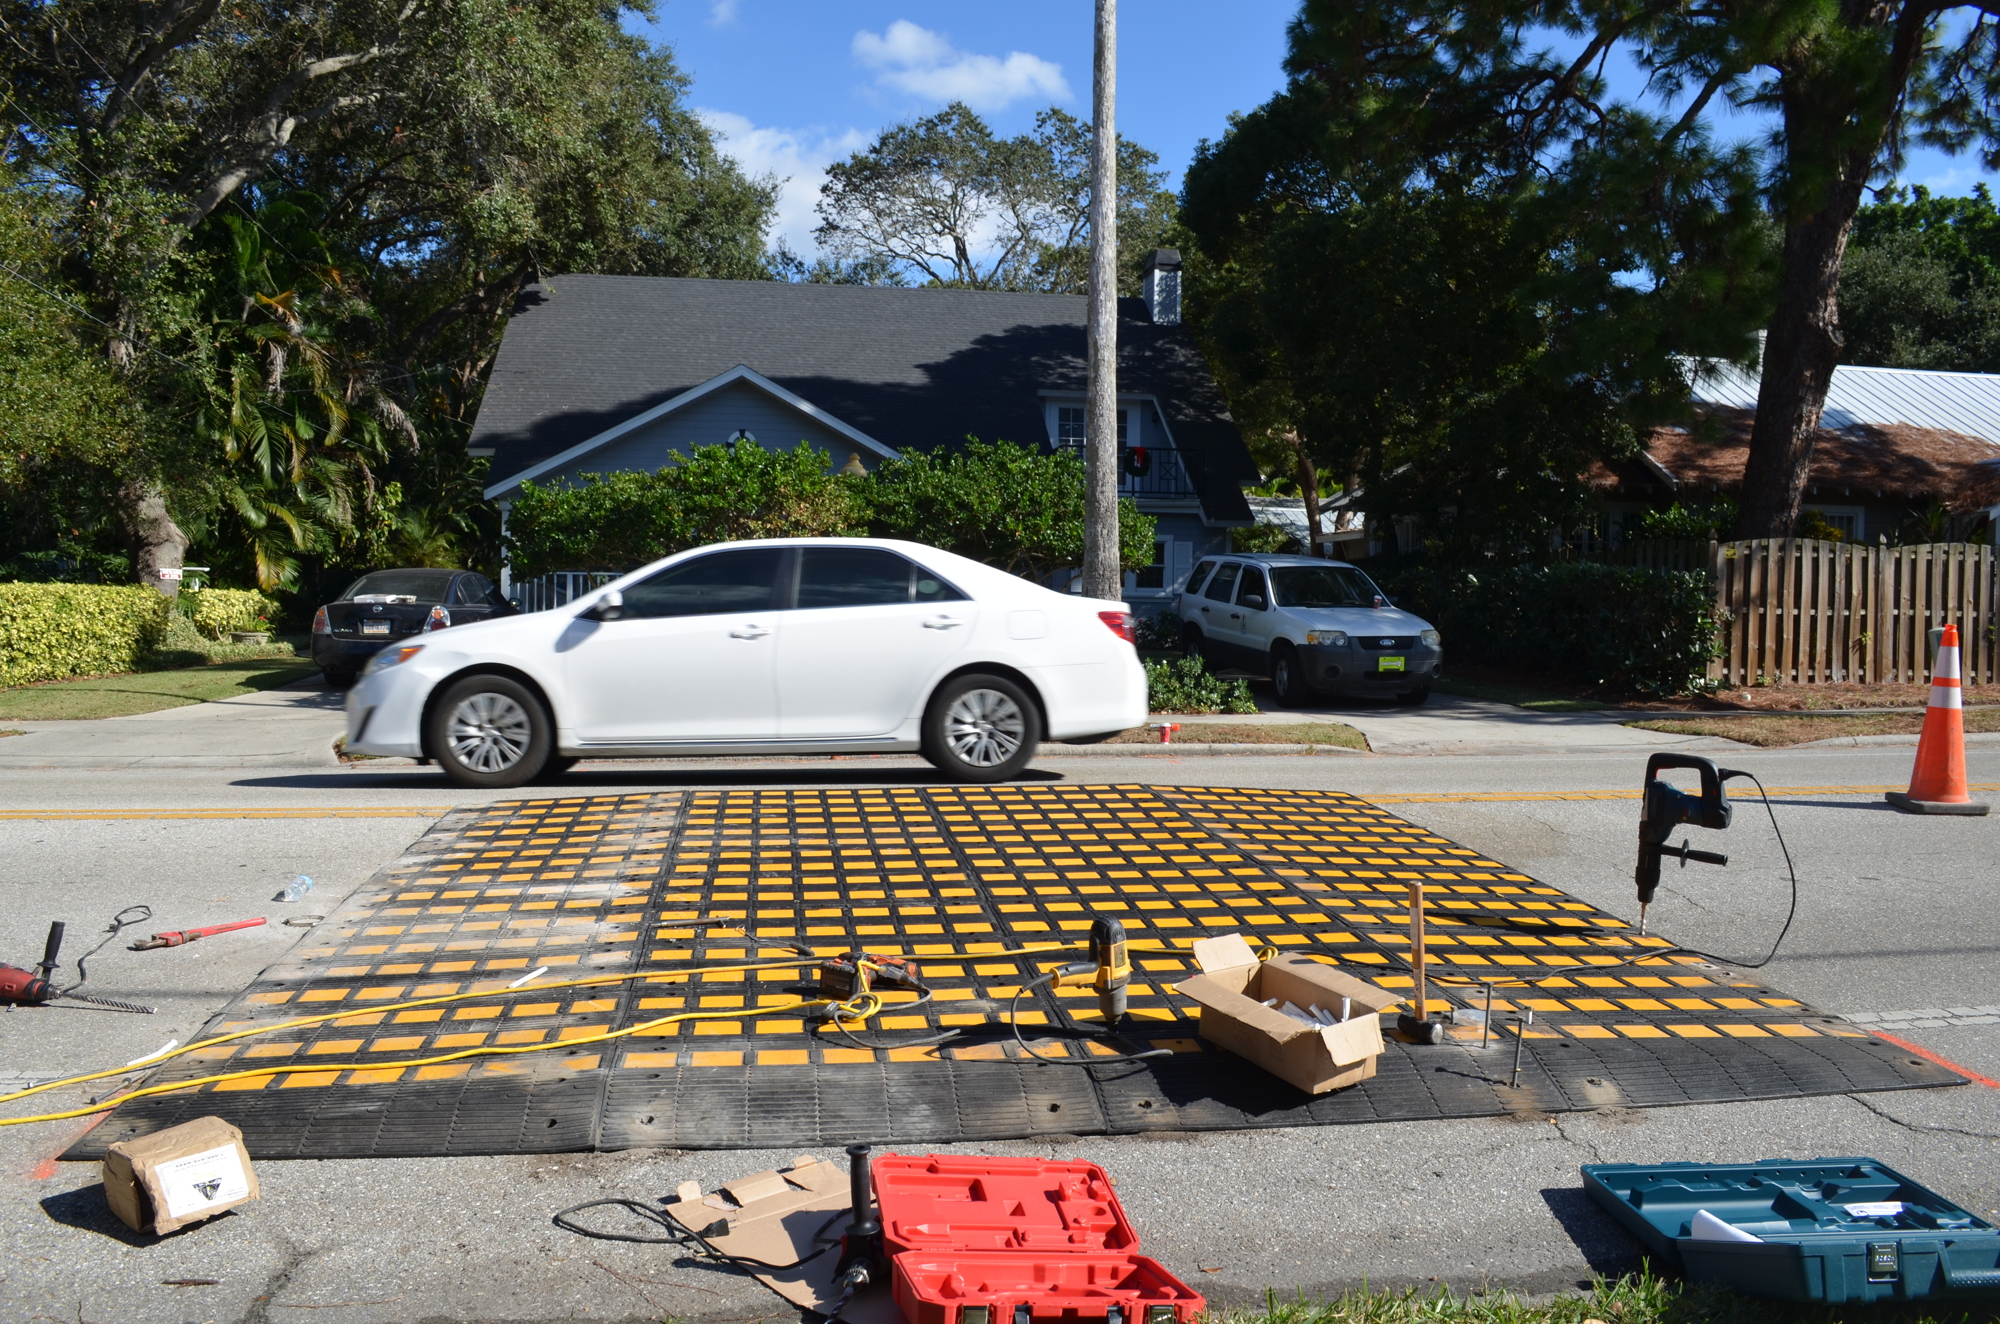 City workers spent Sunday installing a temporary speed table on Orange Avenue.